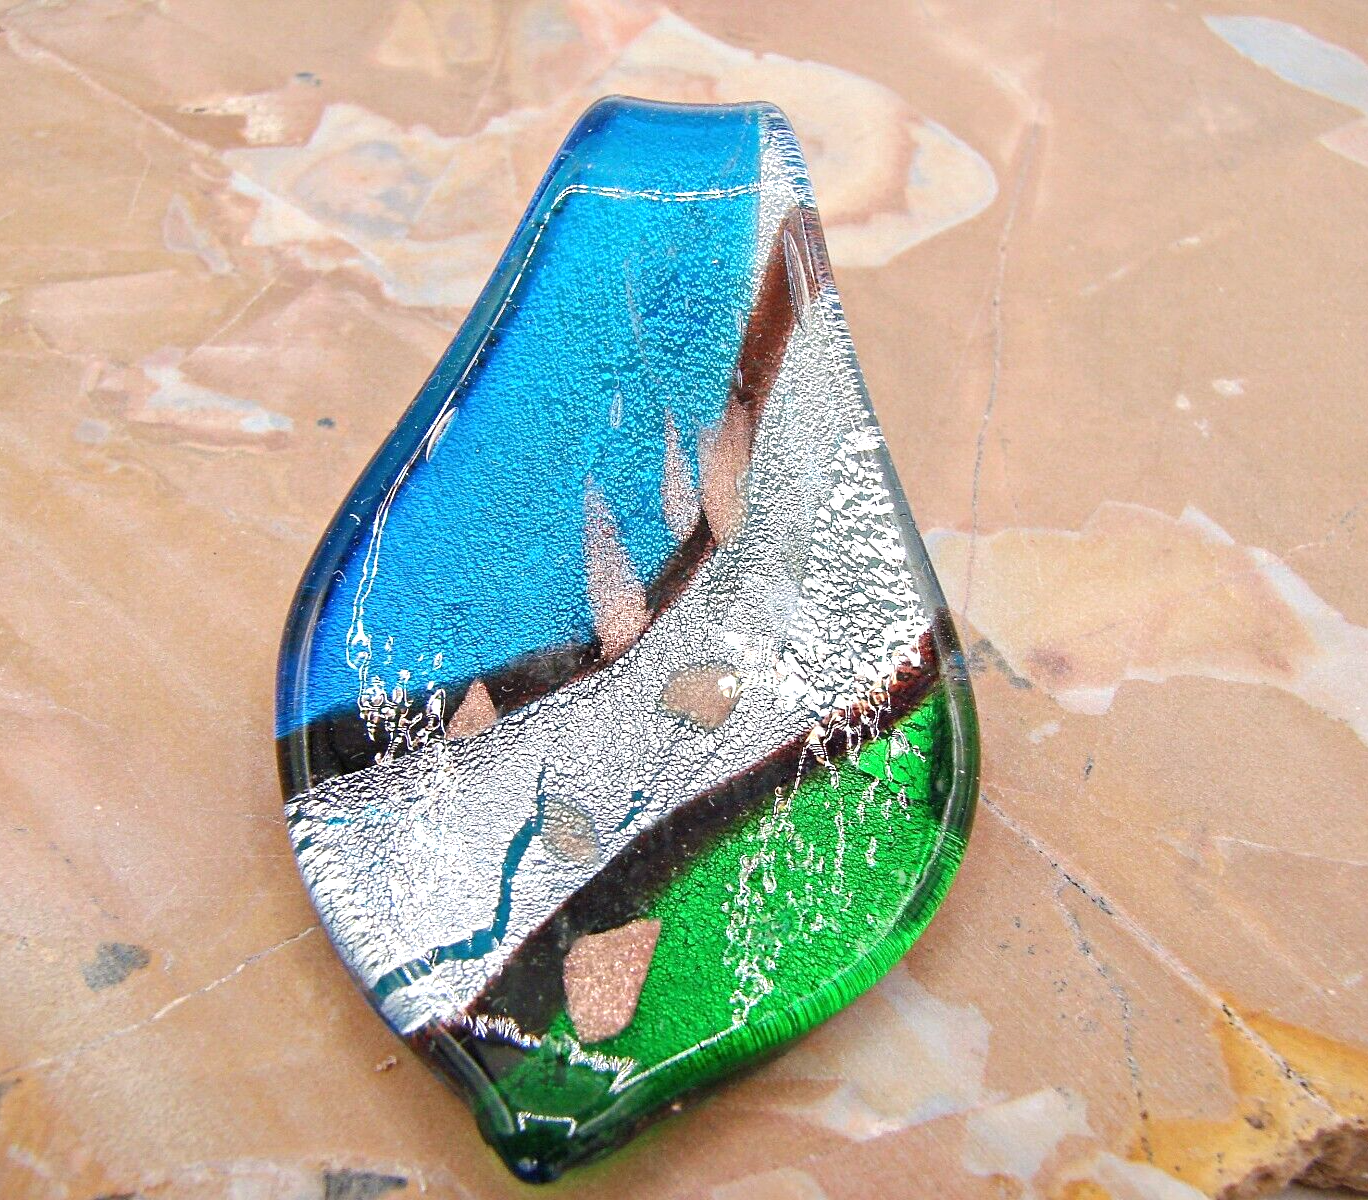 Primary image for Blue Green Silver Fashion Glass Teardrop Pendant Jewelry Gifts Necklace Charm 2"